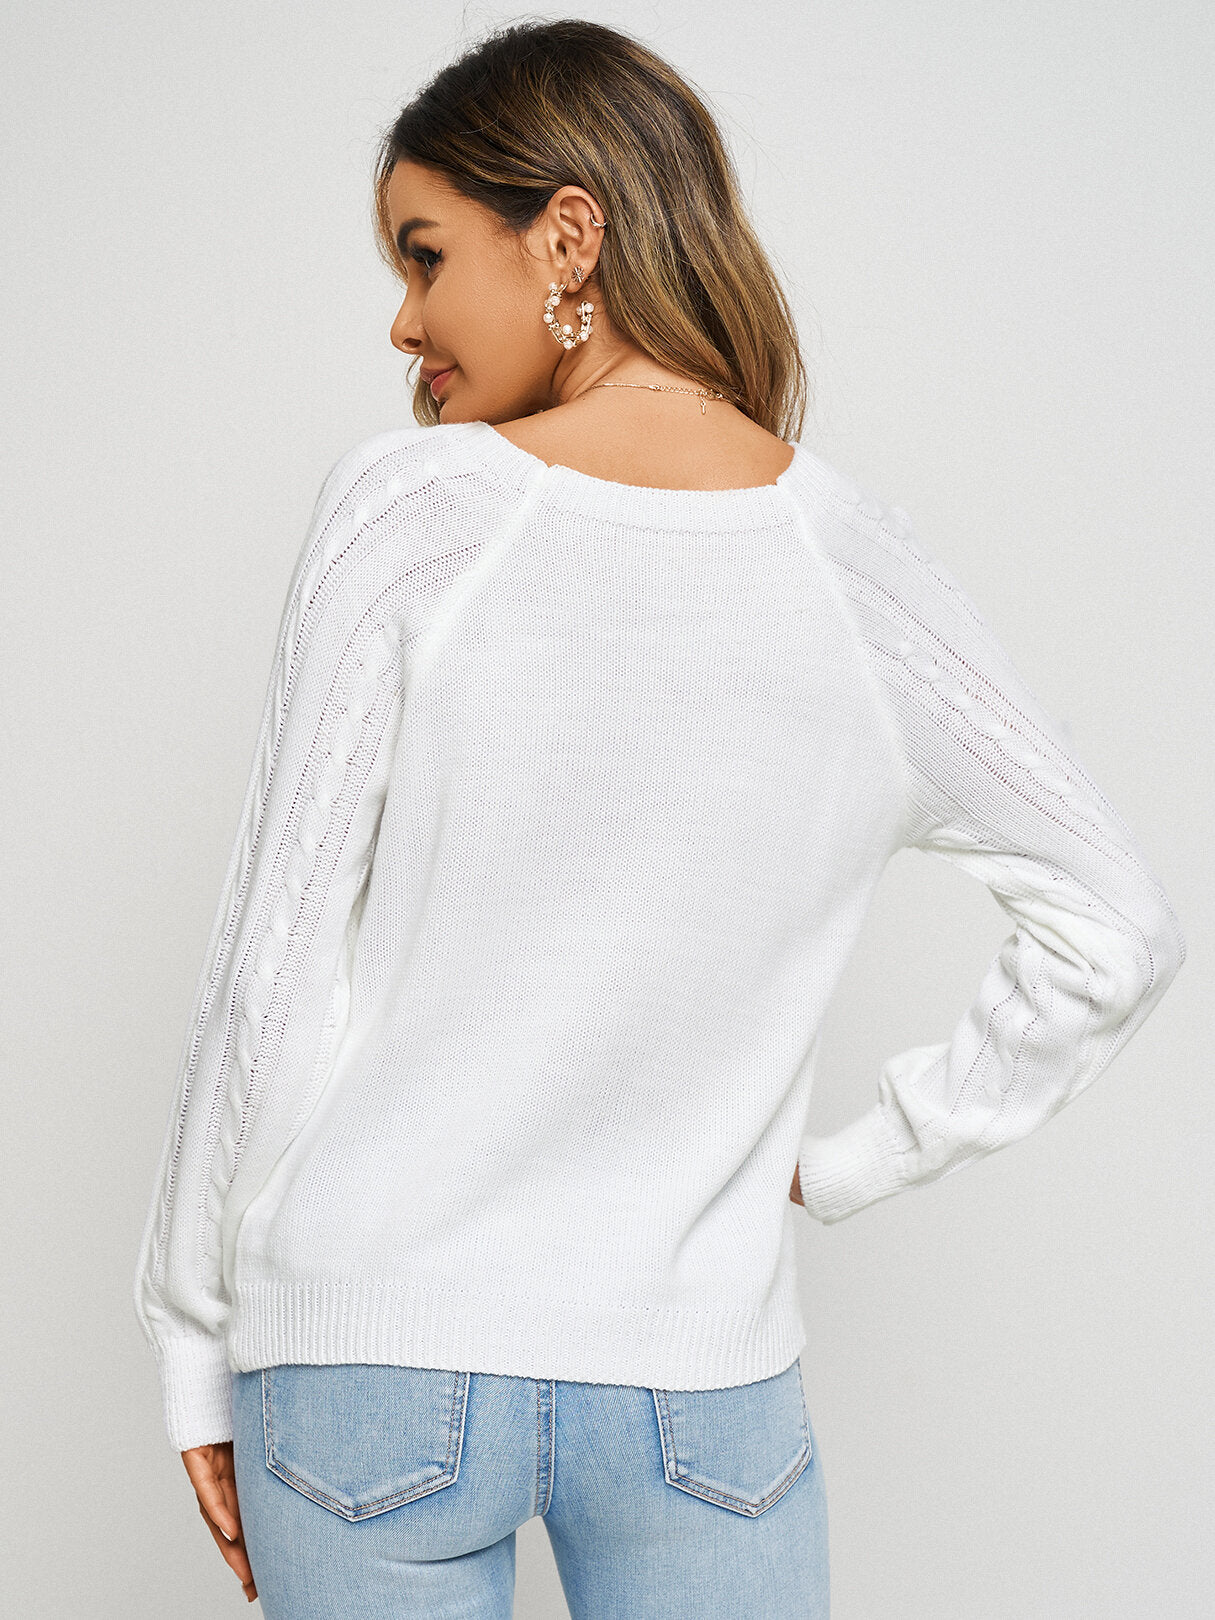 Cable Knit Button Design Round Neck Pullover Sweater